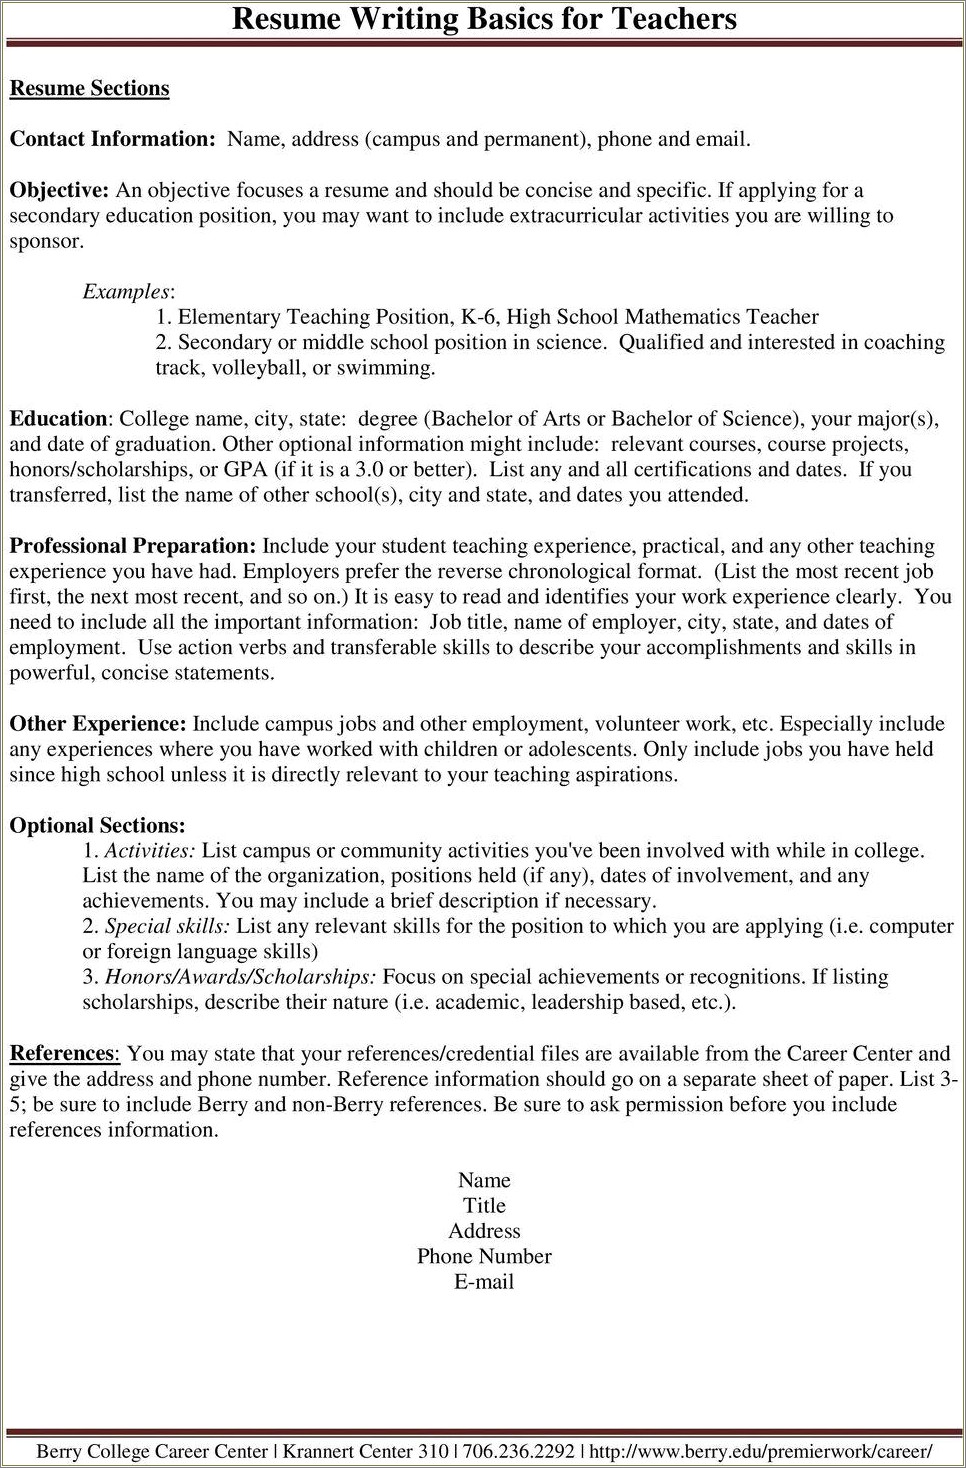 Resume To Apply For On Campus Jobs